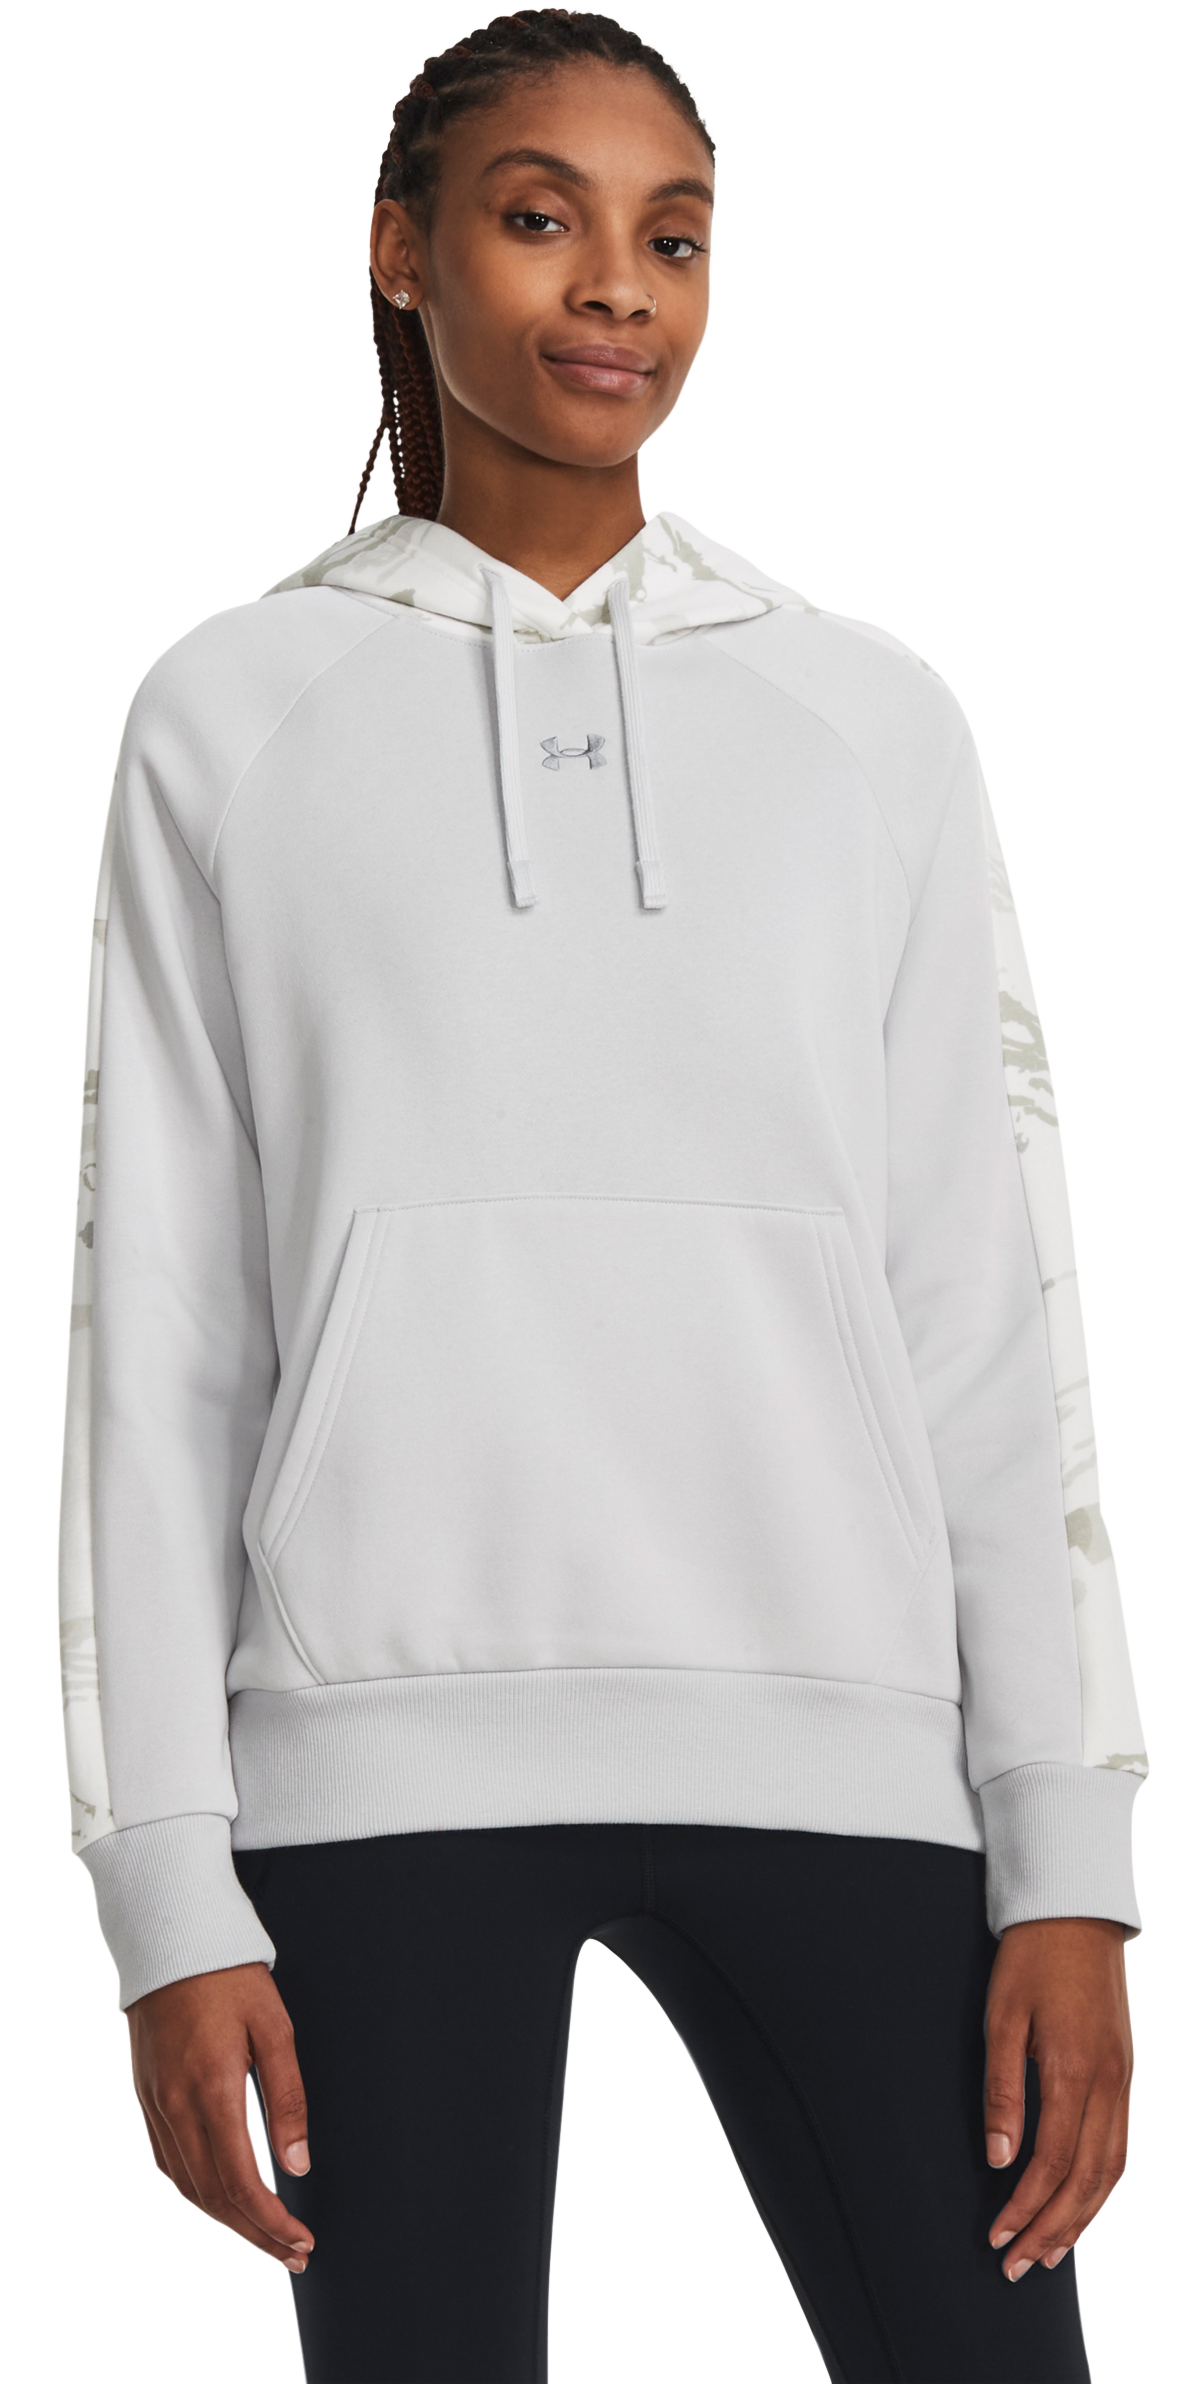 Under Armour Women's Rival Terry Hoodie Rival Pink / White